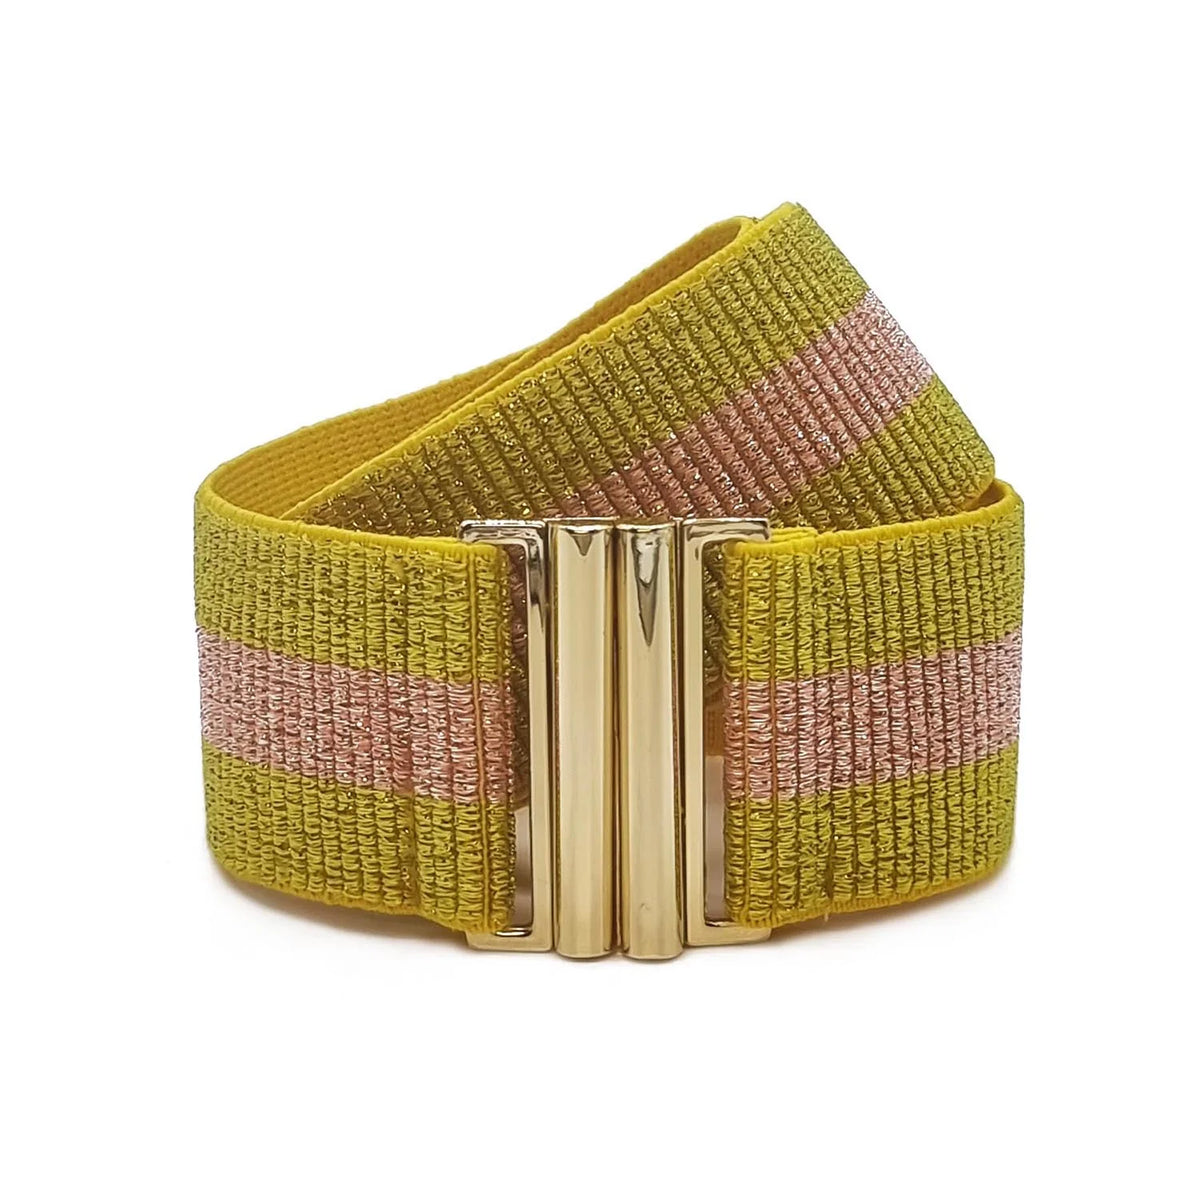 Green and pink elasticated belt with gold buckle